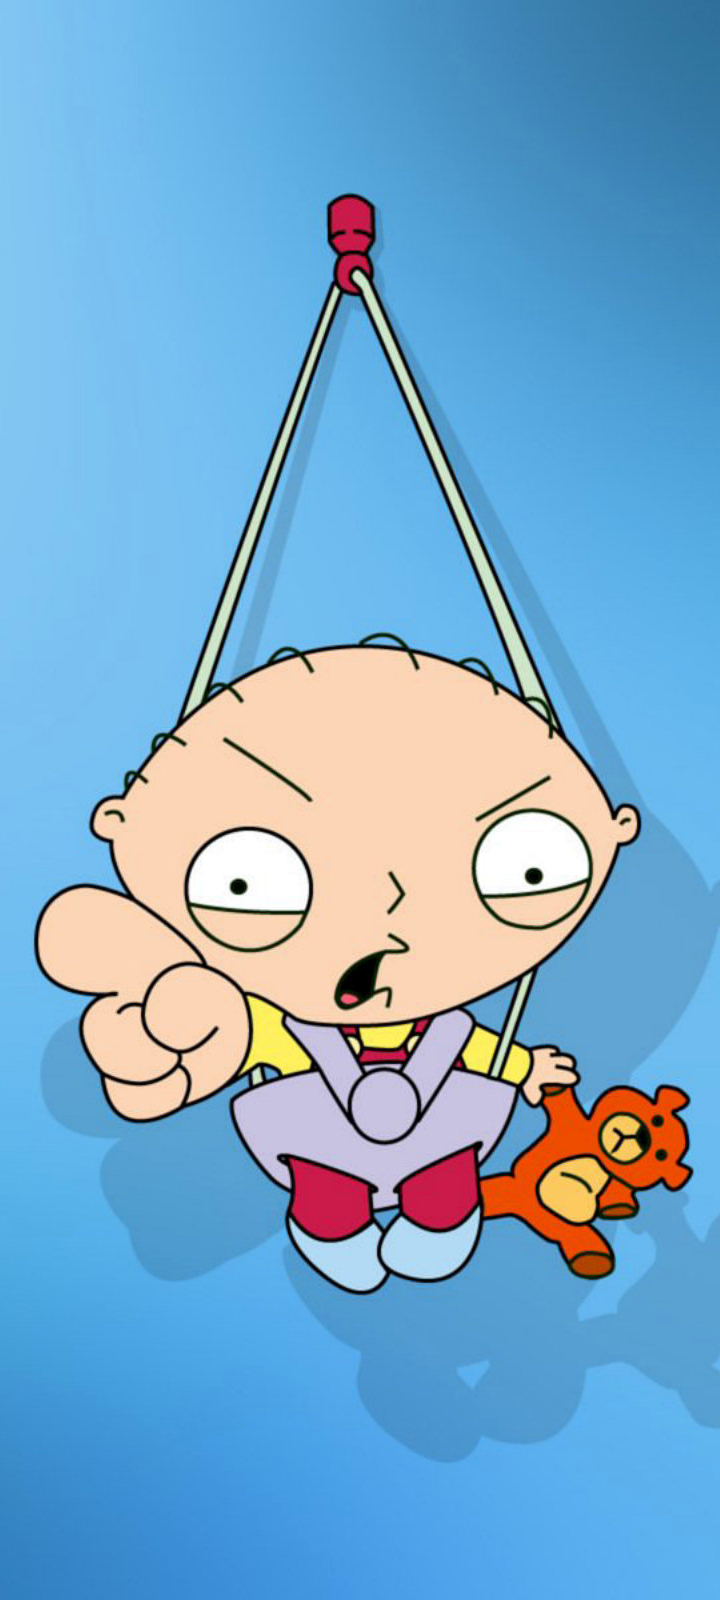 stewie griffin, tv show, family guy